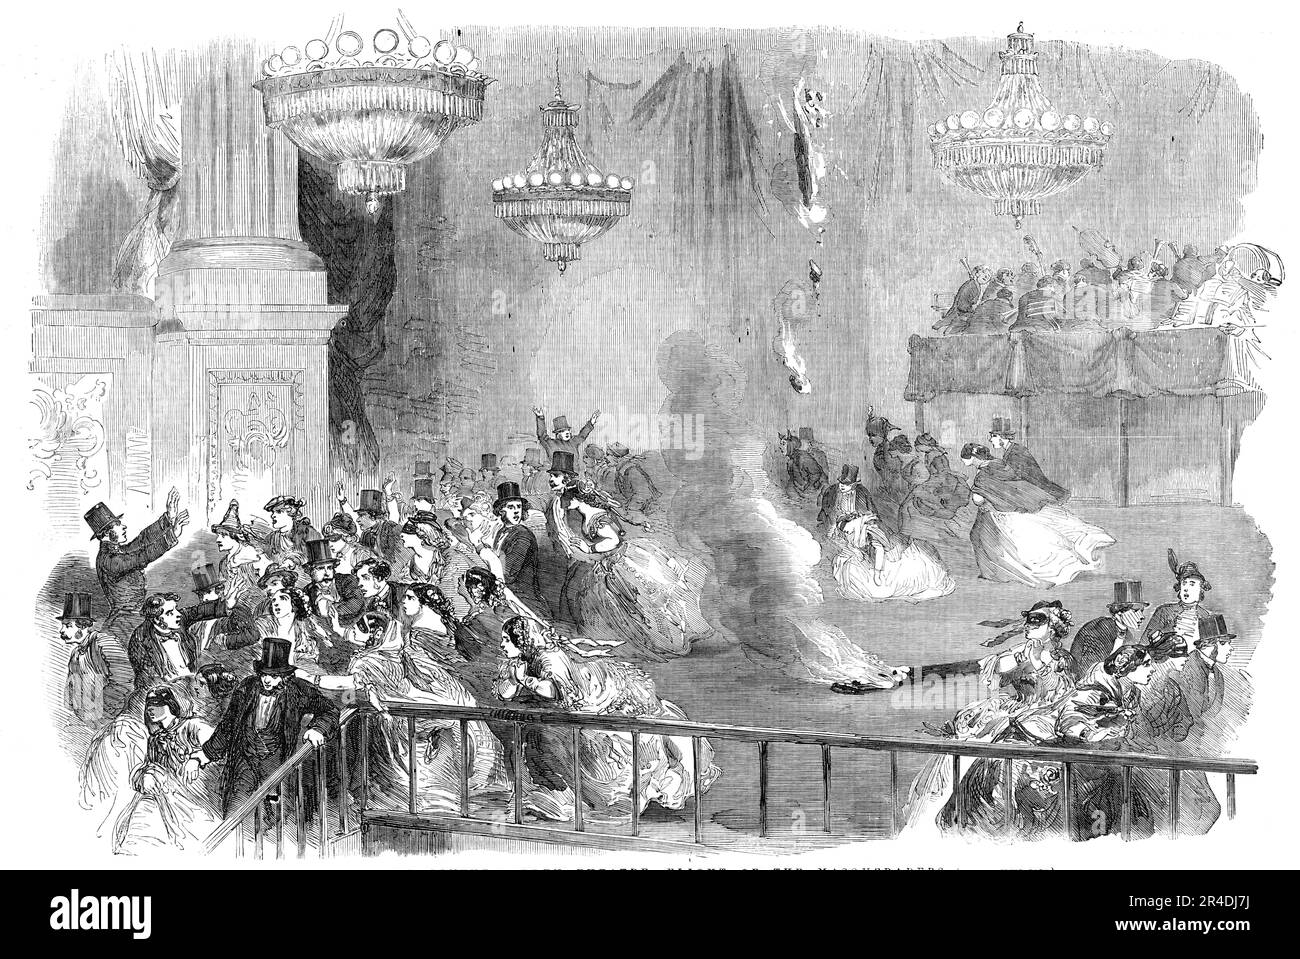 The Burning of Covent-Garden Theatre - Flight of the Masqueraders, 1856. Illustration to a poem suggested by a theatre fire. 'Ho! ho! Tramp, tramp go the hurrying feet - Hark, hark to the rush in the crowded street! But wilder, and fiercer, and madder the rout; Shall resound through these walls ere my flames be crushed out; Hurrah! hurrah! for the Carnival, The rushing and crushing - the masque and the ball; Storm-loving rioters, merry men all, Hurrah! hurrah! for your Carnival! Fled - fled are the harpers, and hushed is their tuning, And trampled the women, all shrieking and swooning; Amid cr Stock Photo